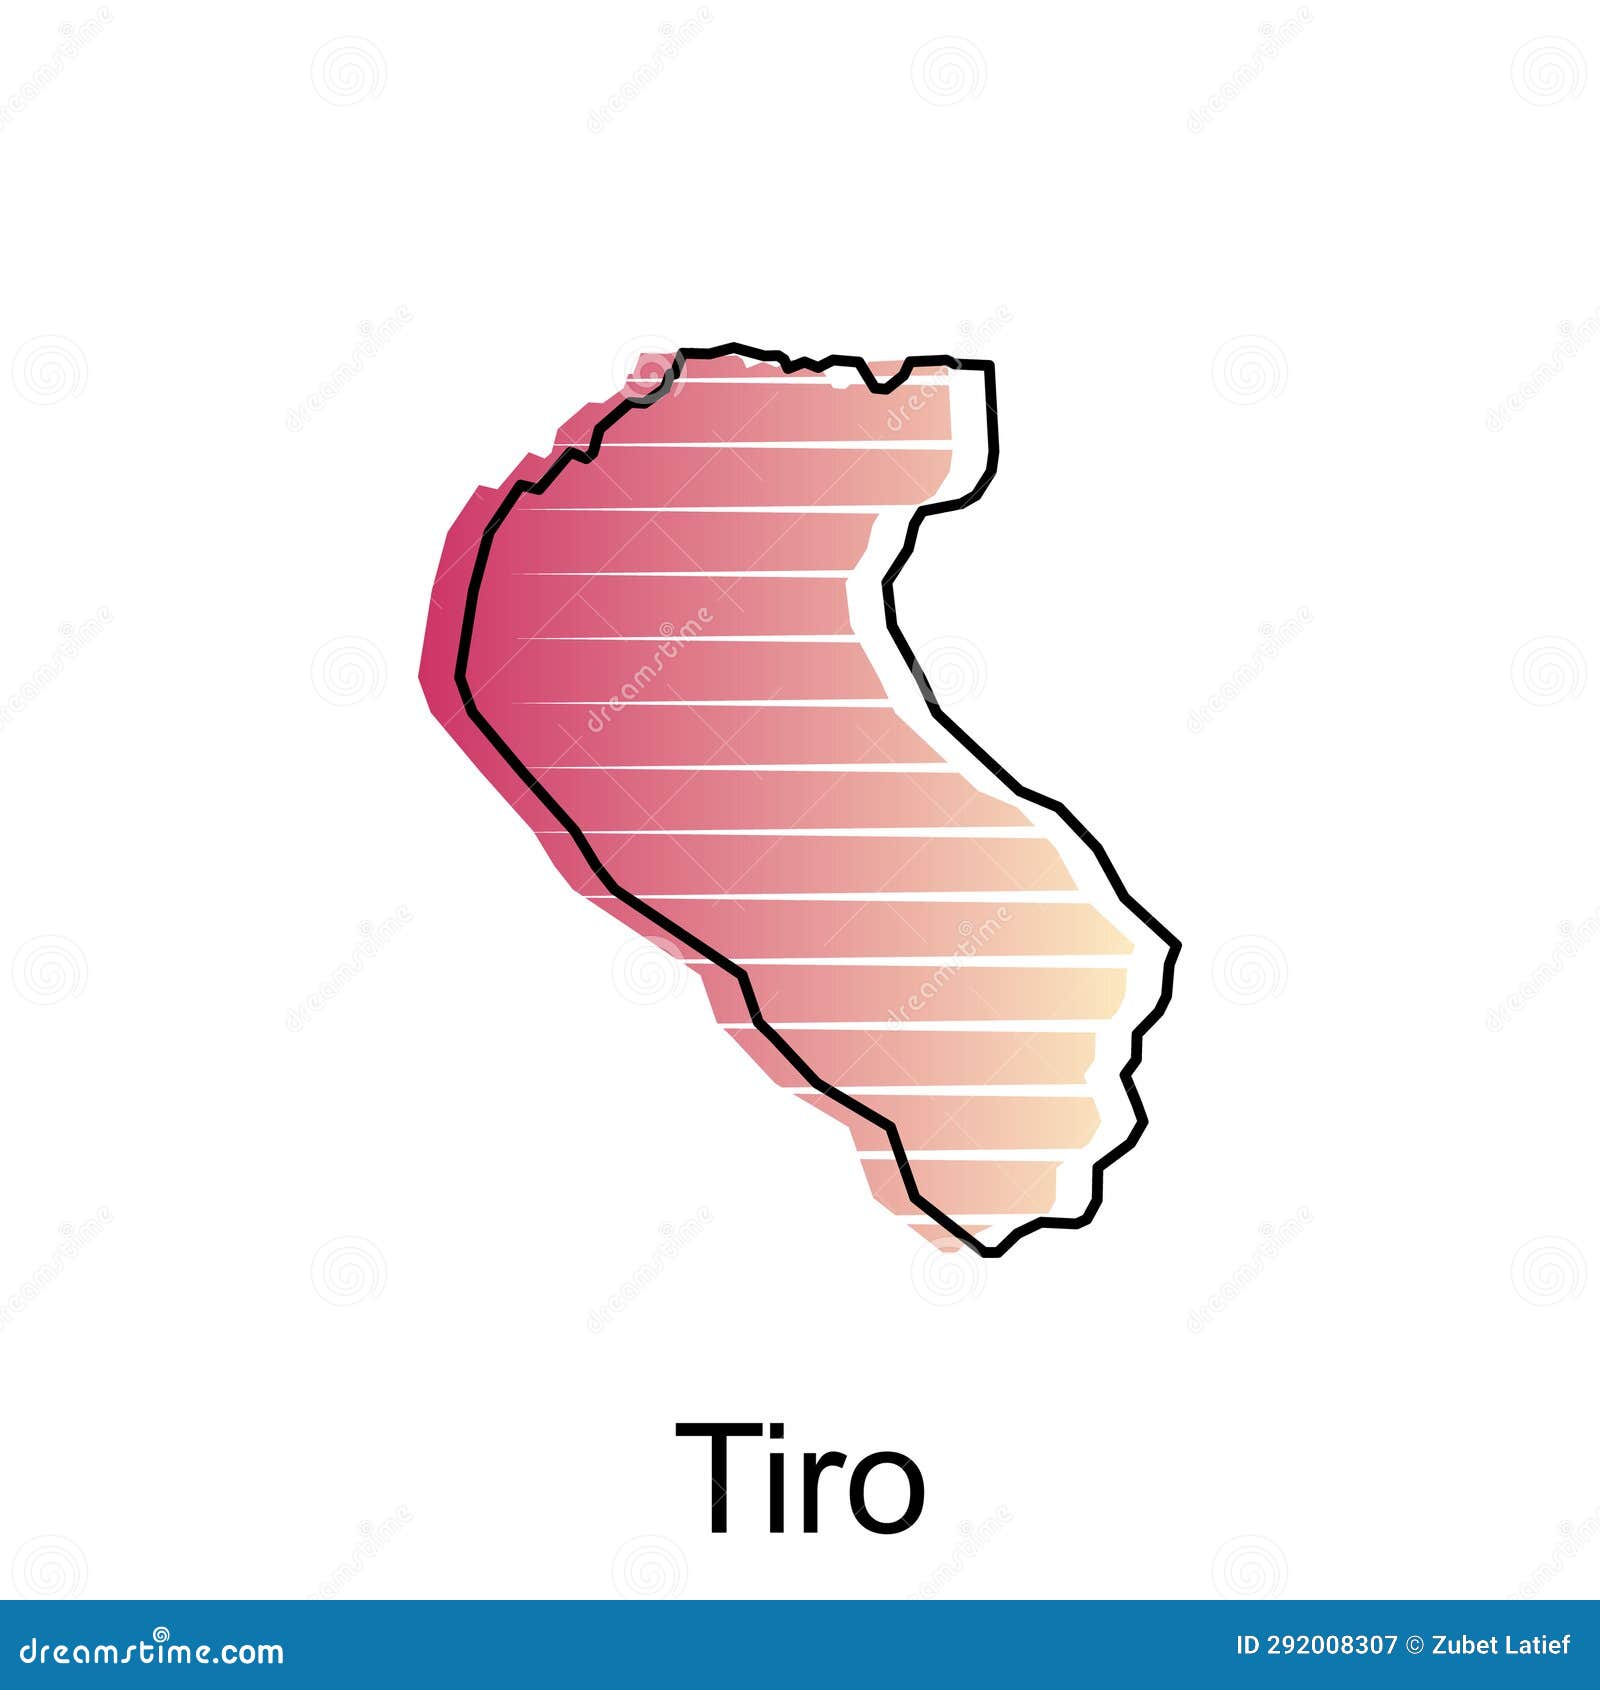 tiro map city.  map of province aceh capital country colorful ,   template on white background